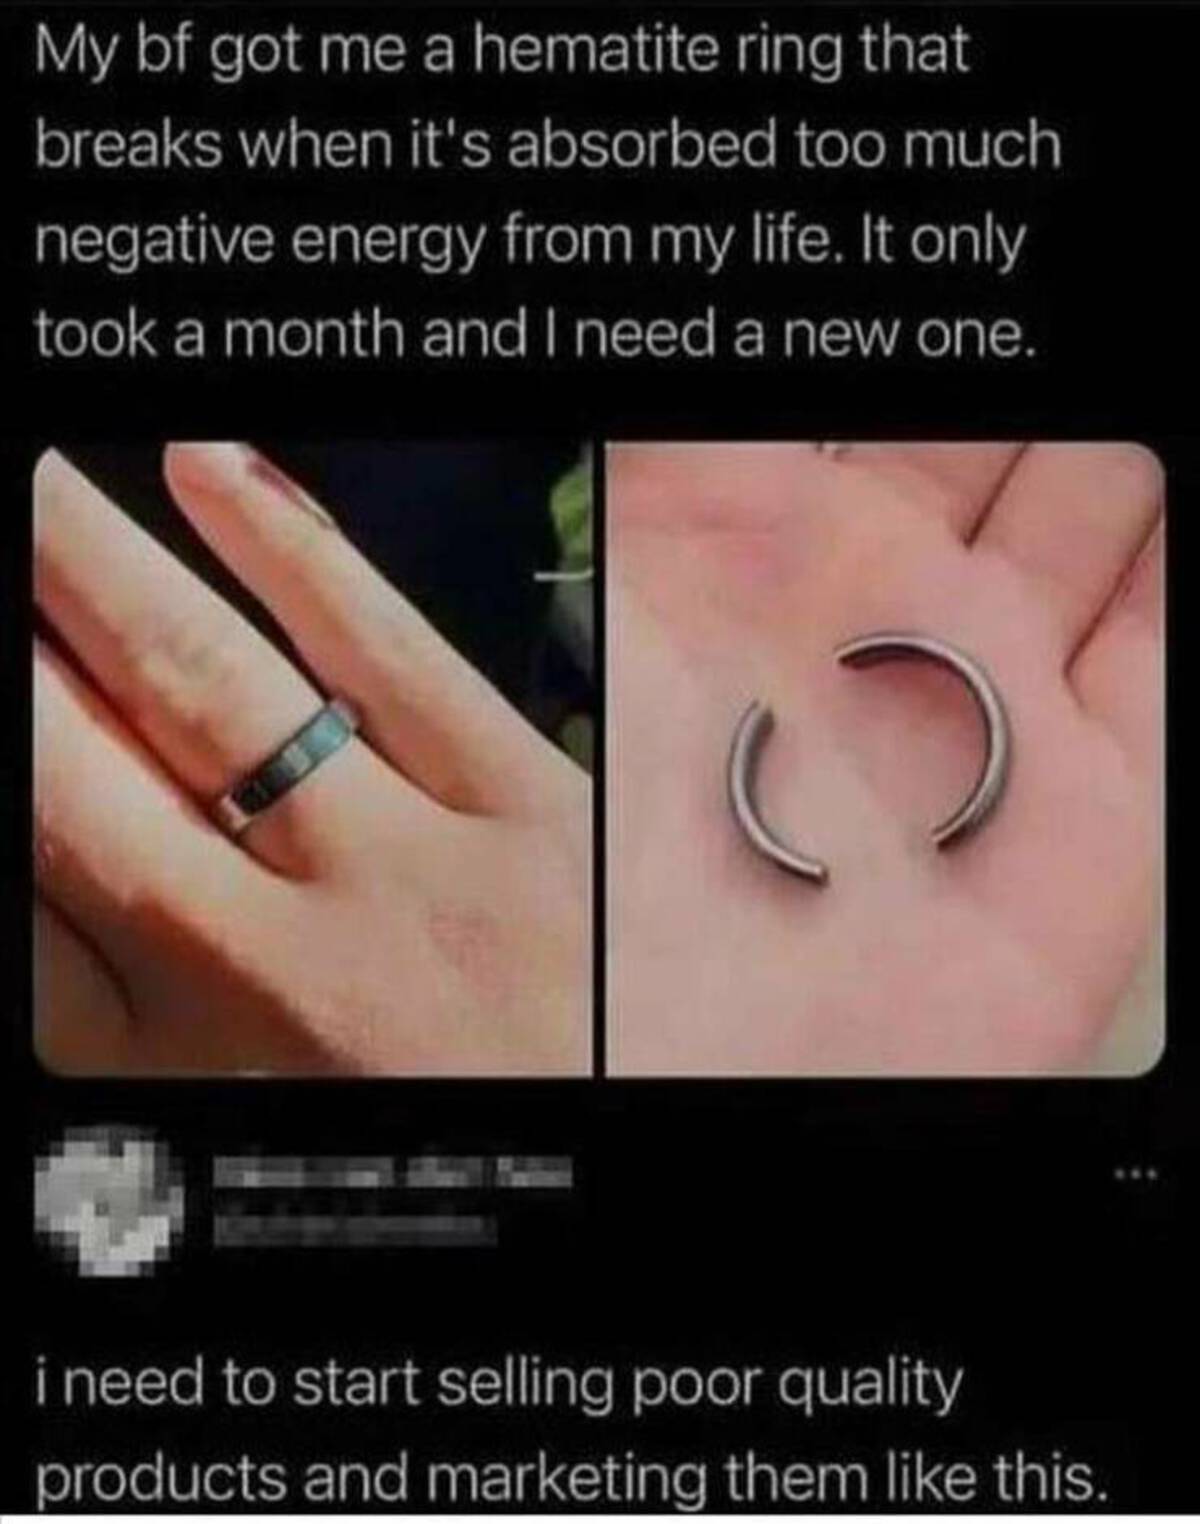 wedding ring - My bf got me a hematite ring that breaks when it's absorbed too much negative energy from my life. It only took a month and I need a new one. C i need to start selling poor quality products and marketing them this.